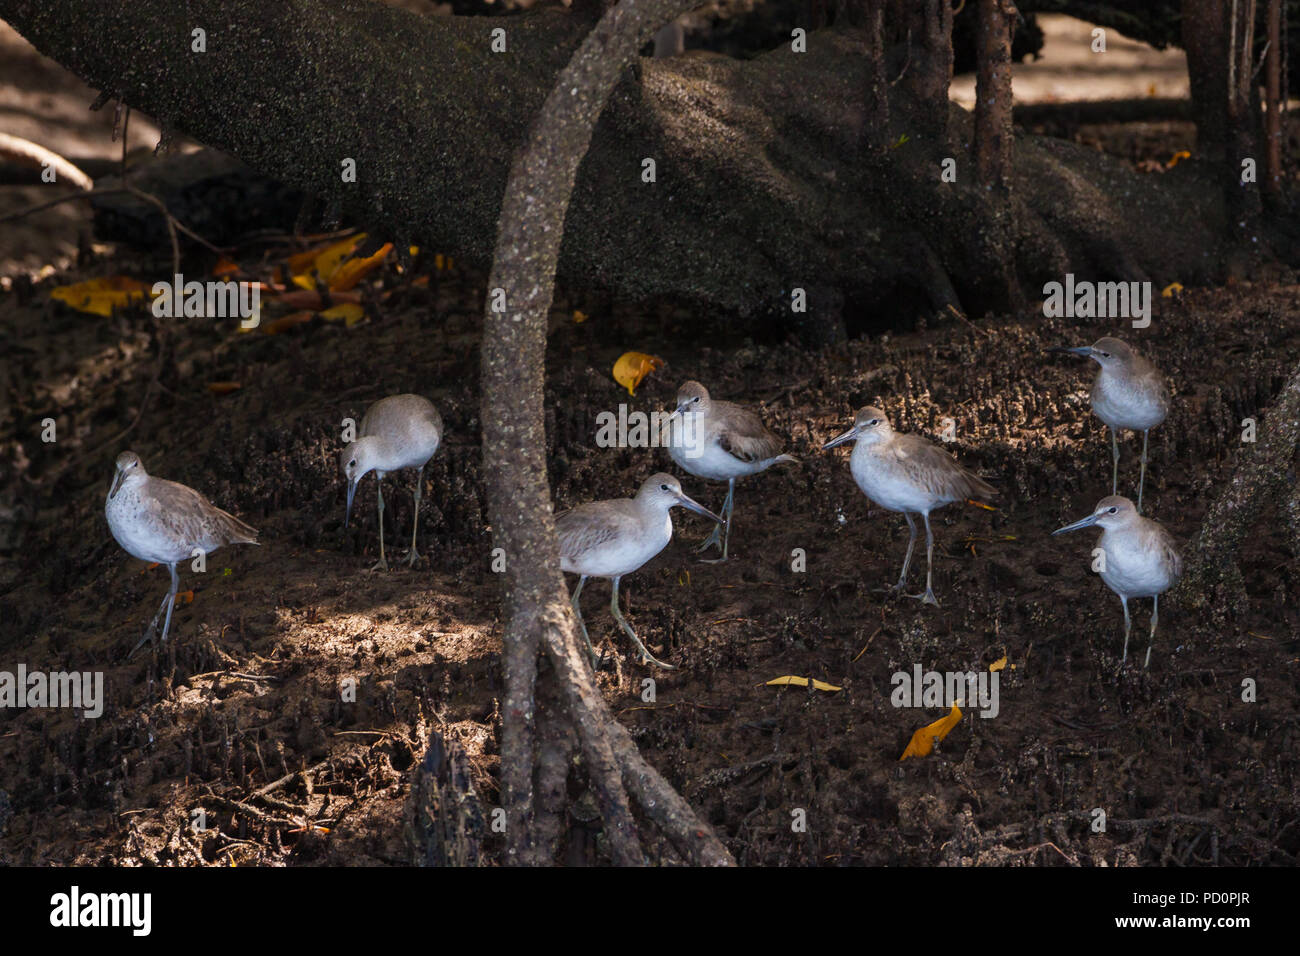 A flock of Short-billed Dowitcher, Limnodromus griseus, in the mangrove forest beside Rio Grande, Cocle province, Republic of Panama. Stock Photo